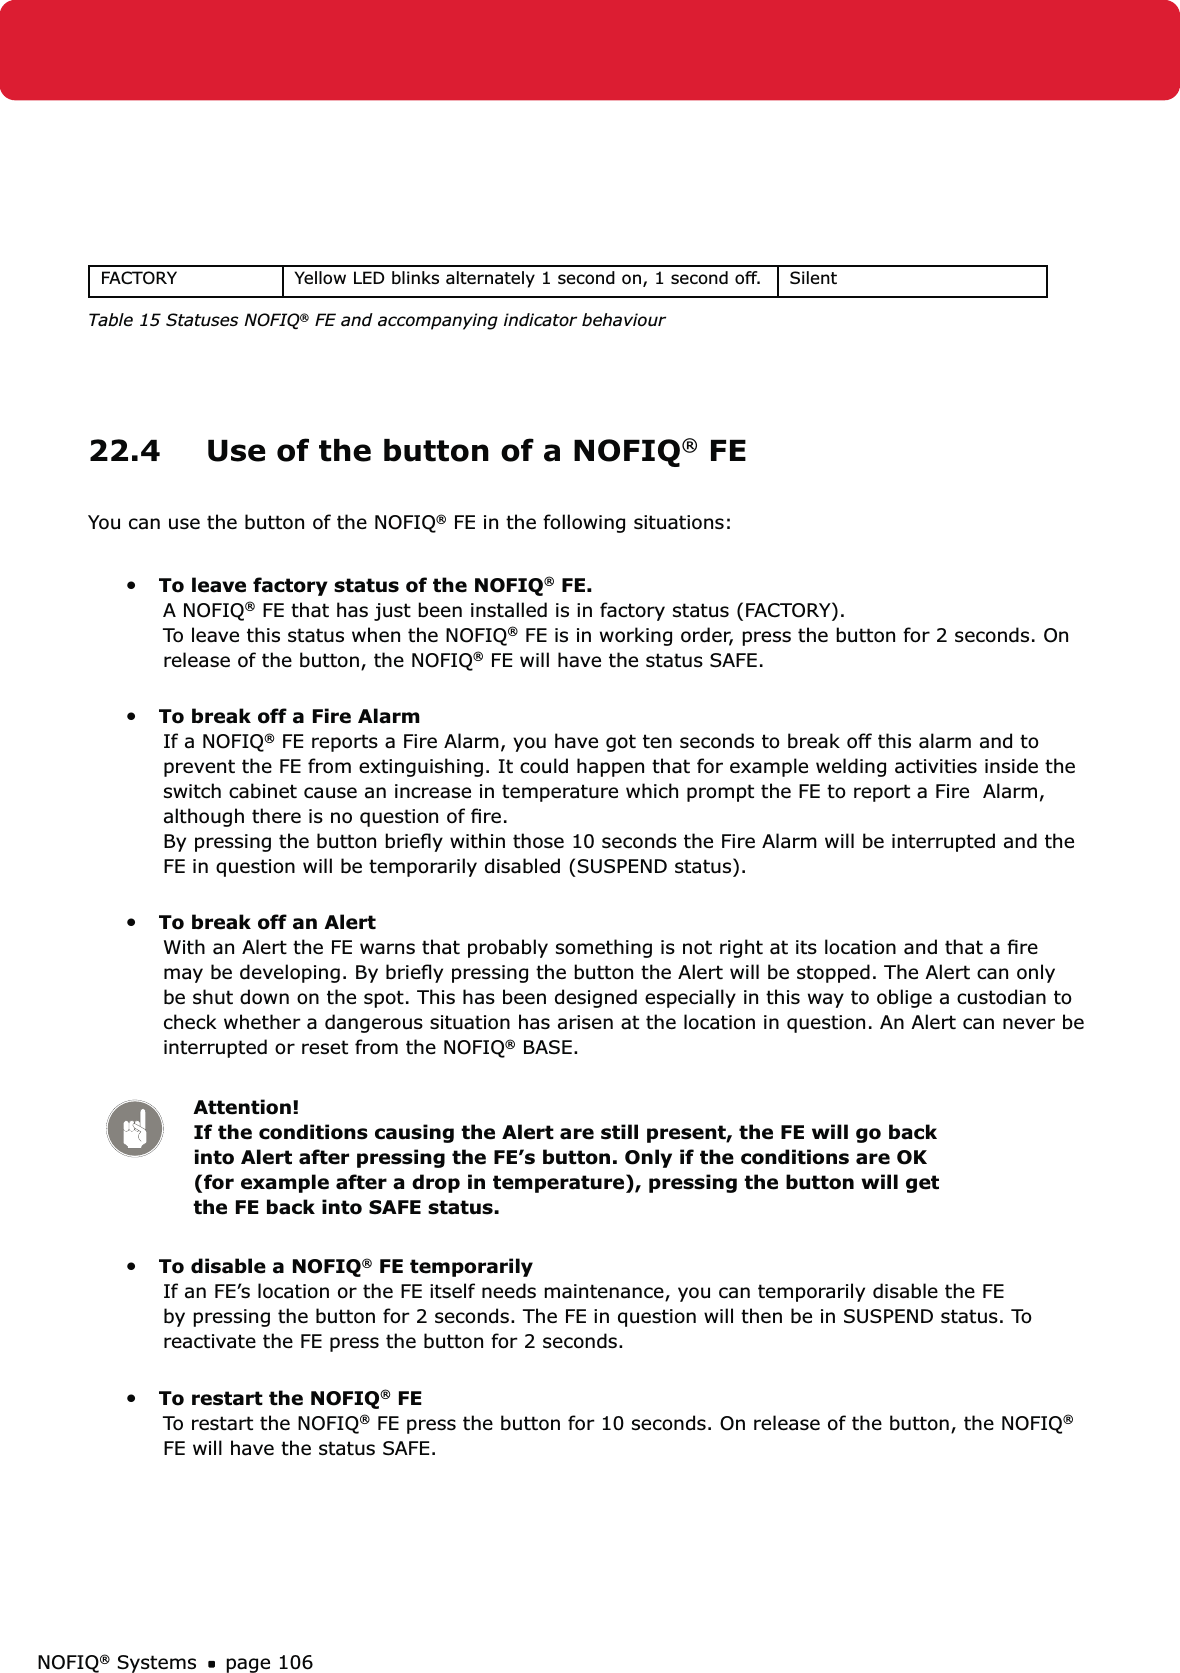 NOFIQ® Systems page 106FACTORY Yellow LED blinks alternately 1 second on, 1 second off. SilentTable 15 Statuses NOFIQ® FE and accompanying indicator behaviour22.4  Use of the button of a NOFIQ® FEYou can use the button of the NOFIQ® FE in the following situations:•   To leave factory status of the NOFIQ® FE. A NOFIQ® FE that has just been installed is in factory status (FACTORY).  To leave this status when the NOFIQ® FE is in working order, press the button for 2 seconds. On release of the button, the NOFIQ® FE will have the status SAFE. •   To break off a Fire Alarm If a NOFIQ® FE reports a Fire Alarm, you have got ten seconds to break off this alarm and to prevent the FE from extinguishing. It could happen that for example welding activities inside the switch cabinet cause an increase in temperature which prompt the FE to report a Fire  Alarm, although there is no question of ﬁre.  By pressing the button brieﬂy within those 10 seconds the Fire Alarm will be interrupted and the FE in question will be temporarily disabled (SUSPEND status). •   To break off an Alert  With an Alert the FE warns that probably something is not right at its location and that a ﬁre may be developing. By brieﬂy pressing the button the Alert will be stopped. The Alert can only be shut down on the spot. This has been designed especially in this way to oblige a custodian to check whether a dangerous situation has arisen at the location in question. An Alert can never be interrupted or reset from the NOFIQ® BASE. Attention! If the conditions causing the Alert are still present, the FE will go back into Alert after pressing the FE’s button. Only if the conditions are OK (for example after a drop in temperature), pressing the button will get the FE back into SAFE status.•   To disable a NOFIQ® FE temporarily If an FE’s location or the FE itself needs maintenance, you can temporarily disable the FE by pressing the button for 2 seconds. The FE in question will then be in SUSPEND status. To reactivate the FE press the button for 2 seconds.  •   To restart the NOFIQ® FE To restart the NOFIQ® FE press the button for 10 seconds. On release of the button, the NOFIQ® FE will have the status SAFE.